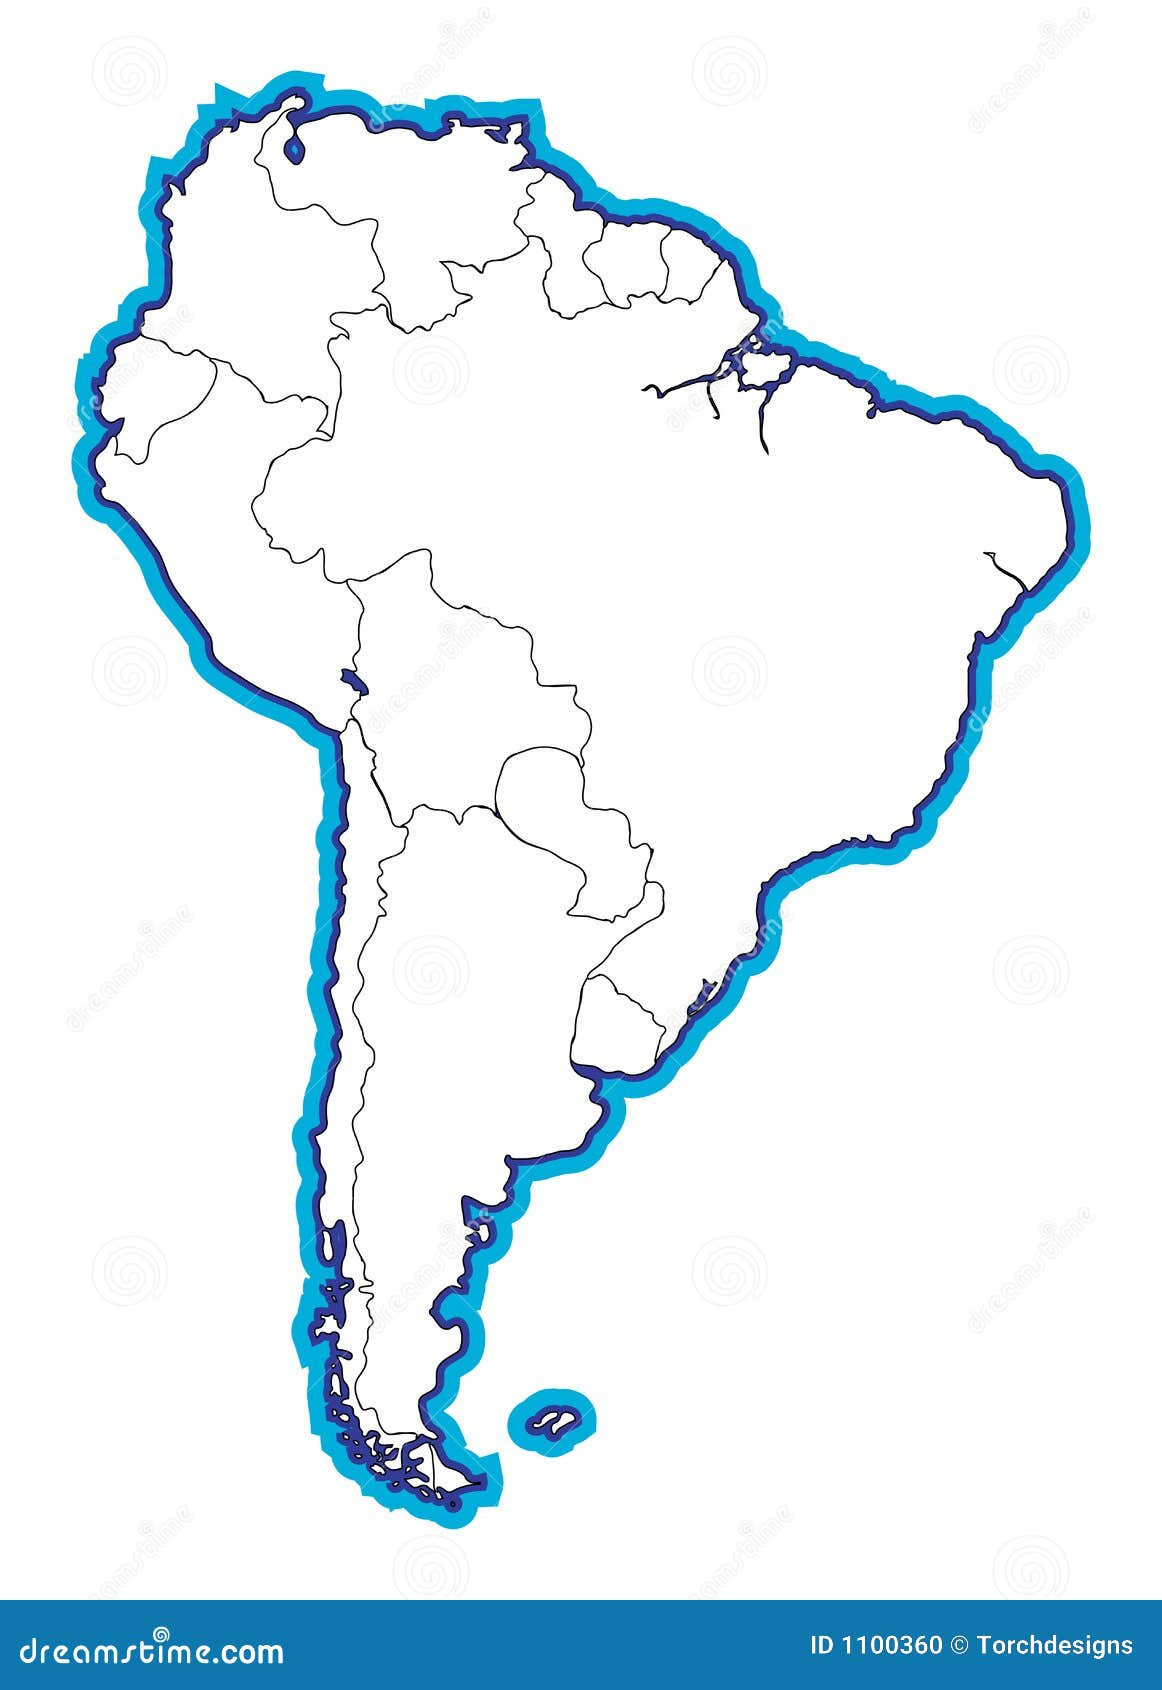 Map Of South America Without Names